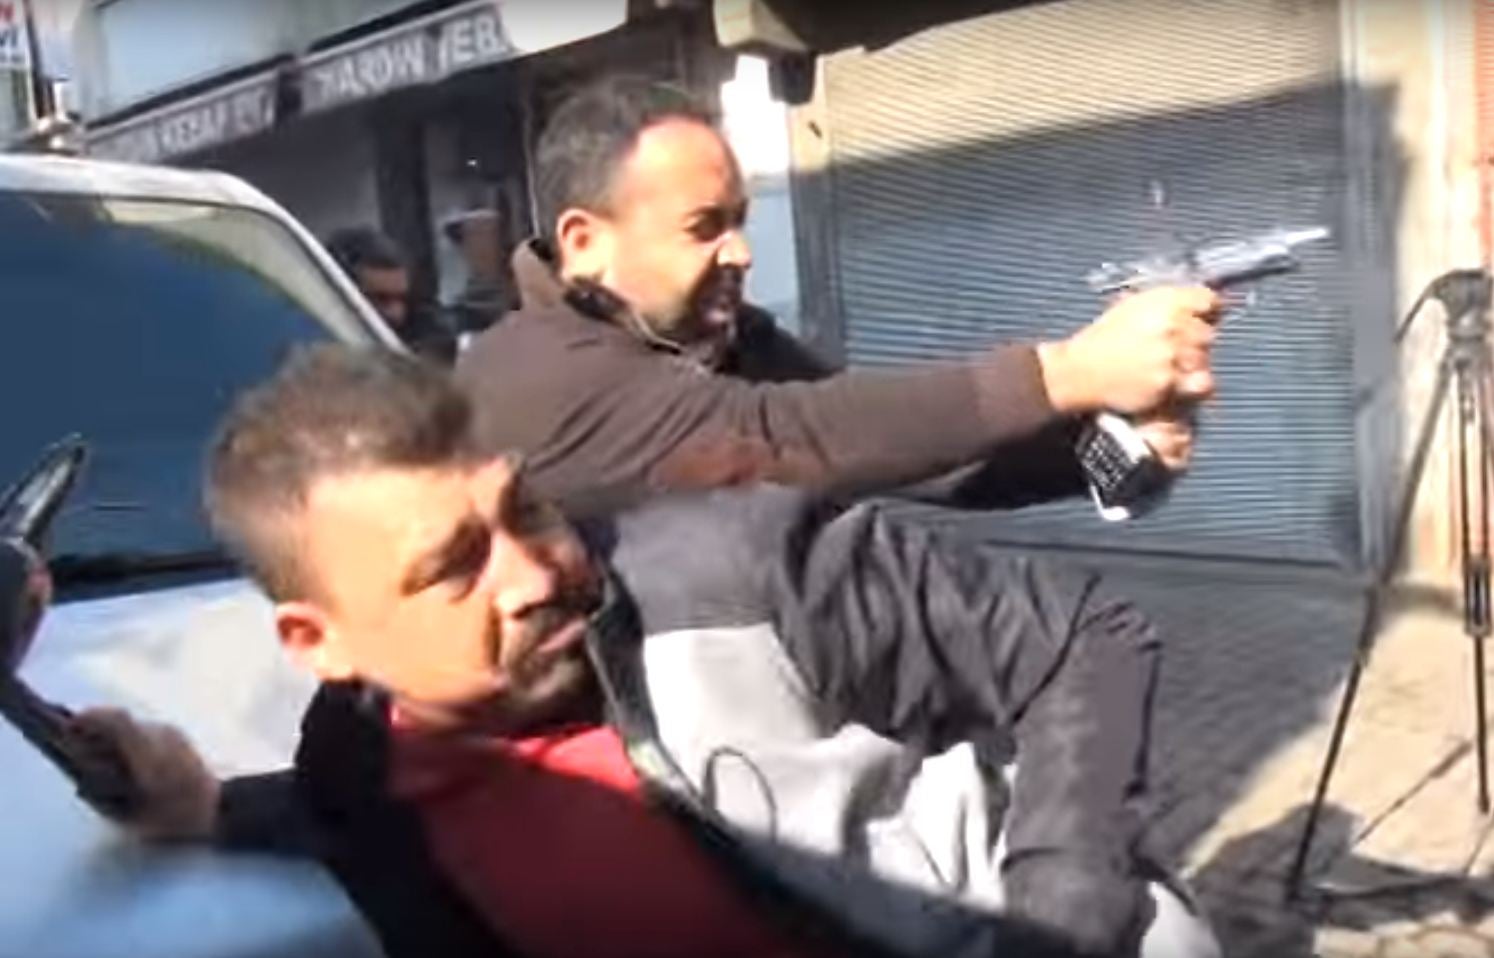 Plain-clothed police fire at a suspect during the gun battle that saw Tahir Elci killed